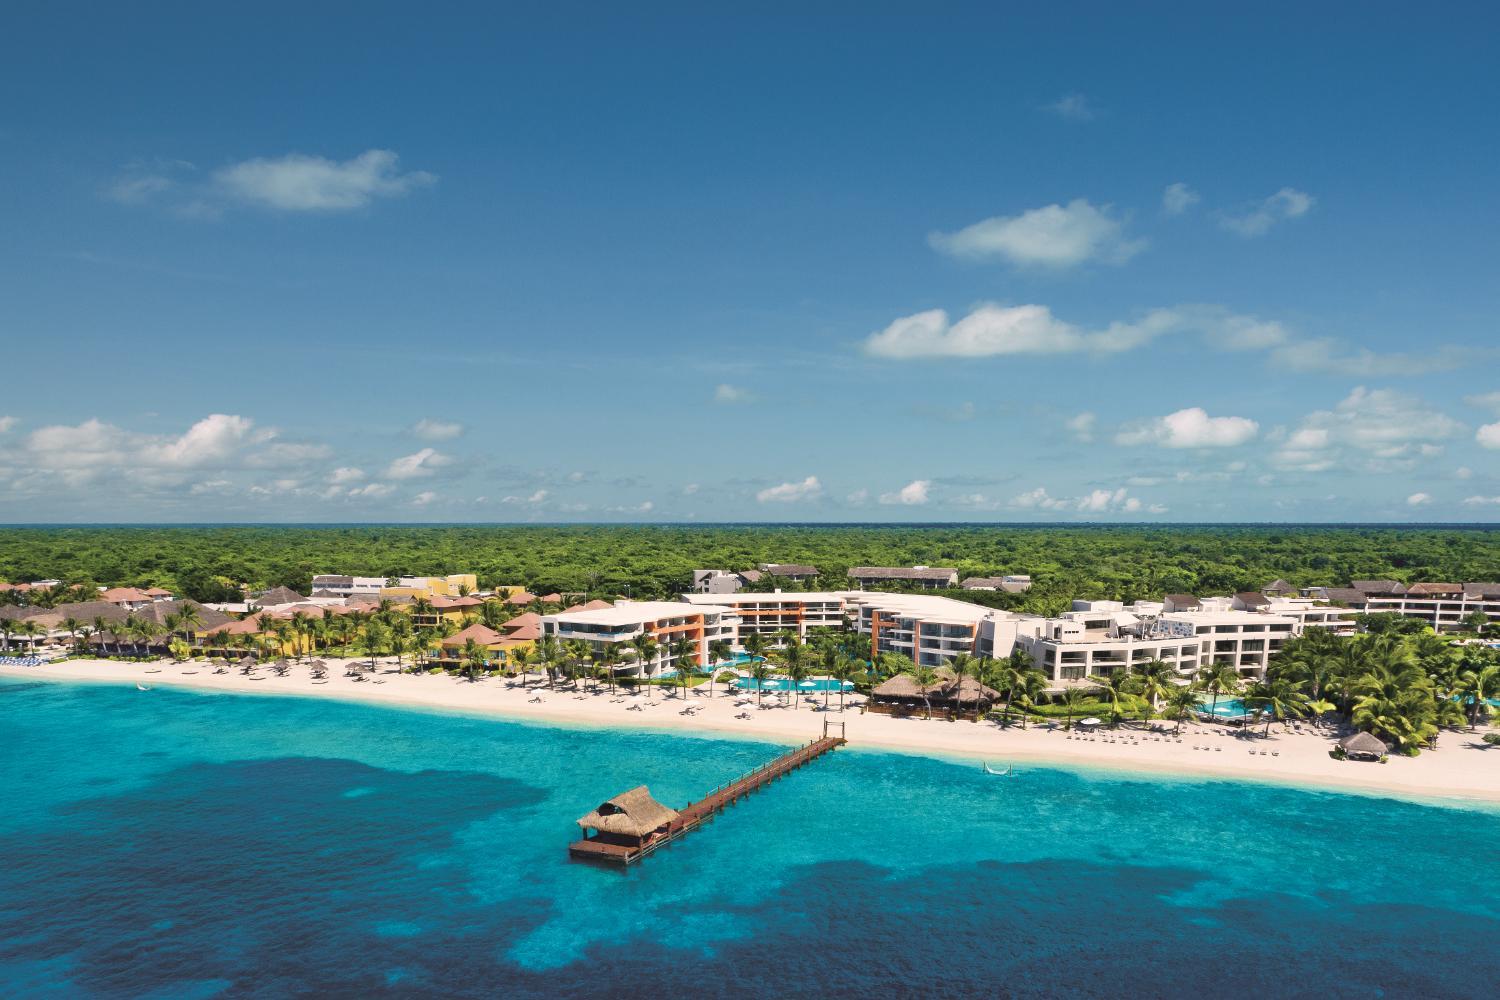 Hotel for Adults-only - Secrets Aura Cozumel - Adults Only